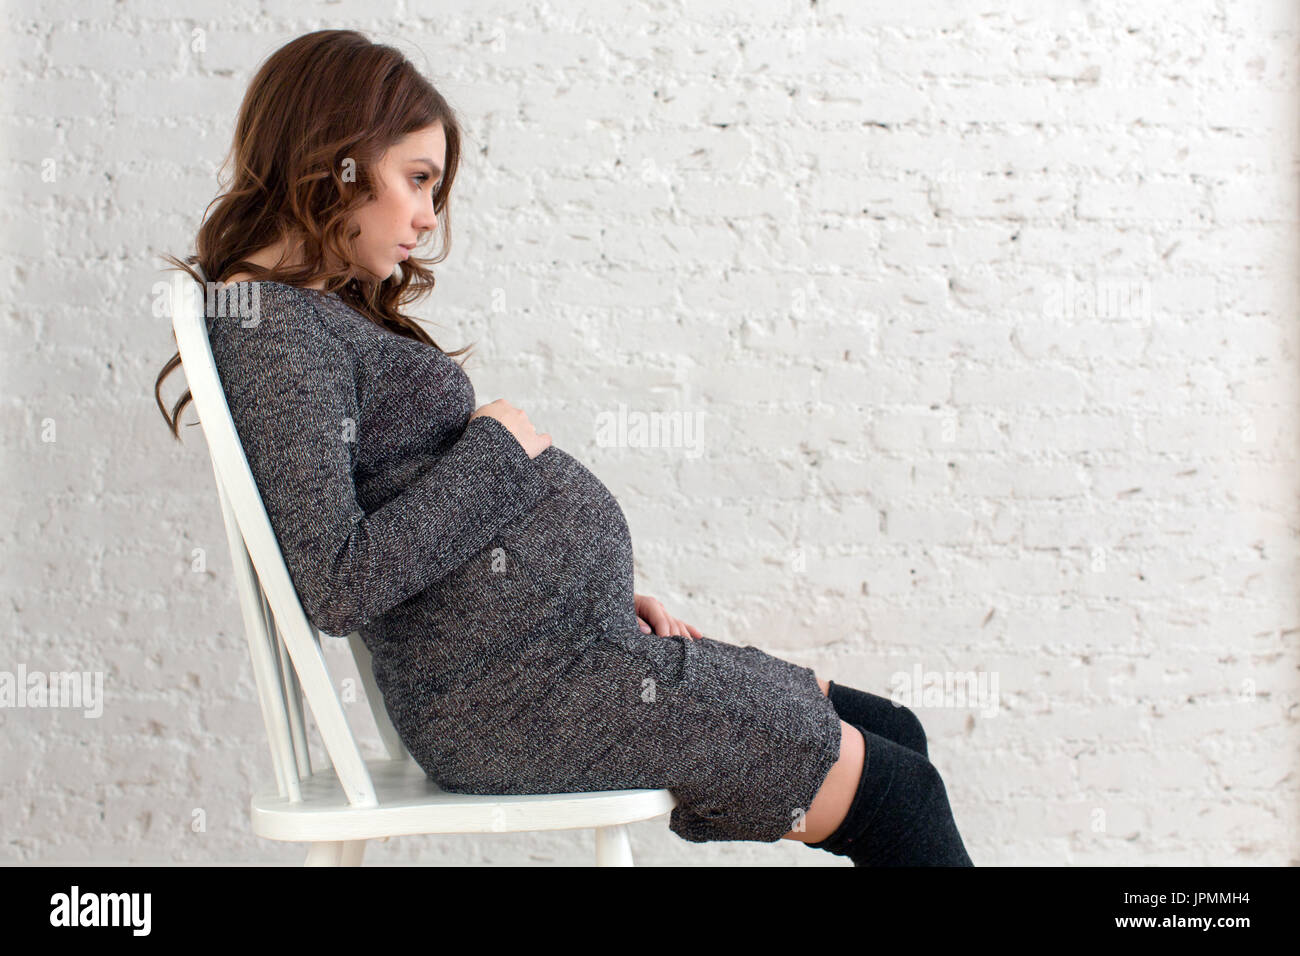 Pregnant female sitting on chair posing Stock Photo